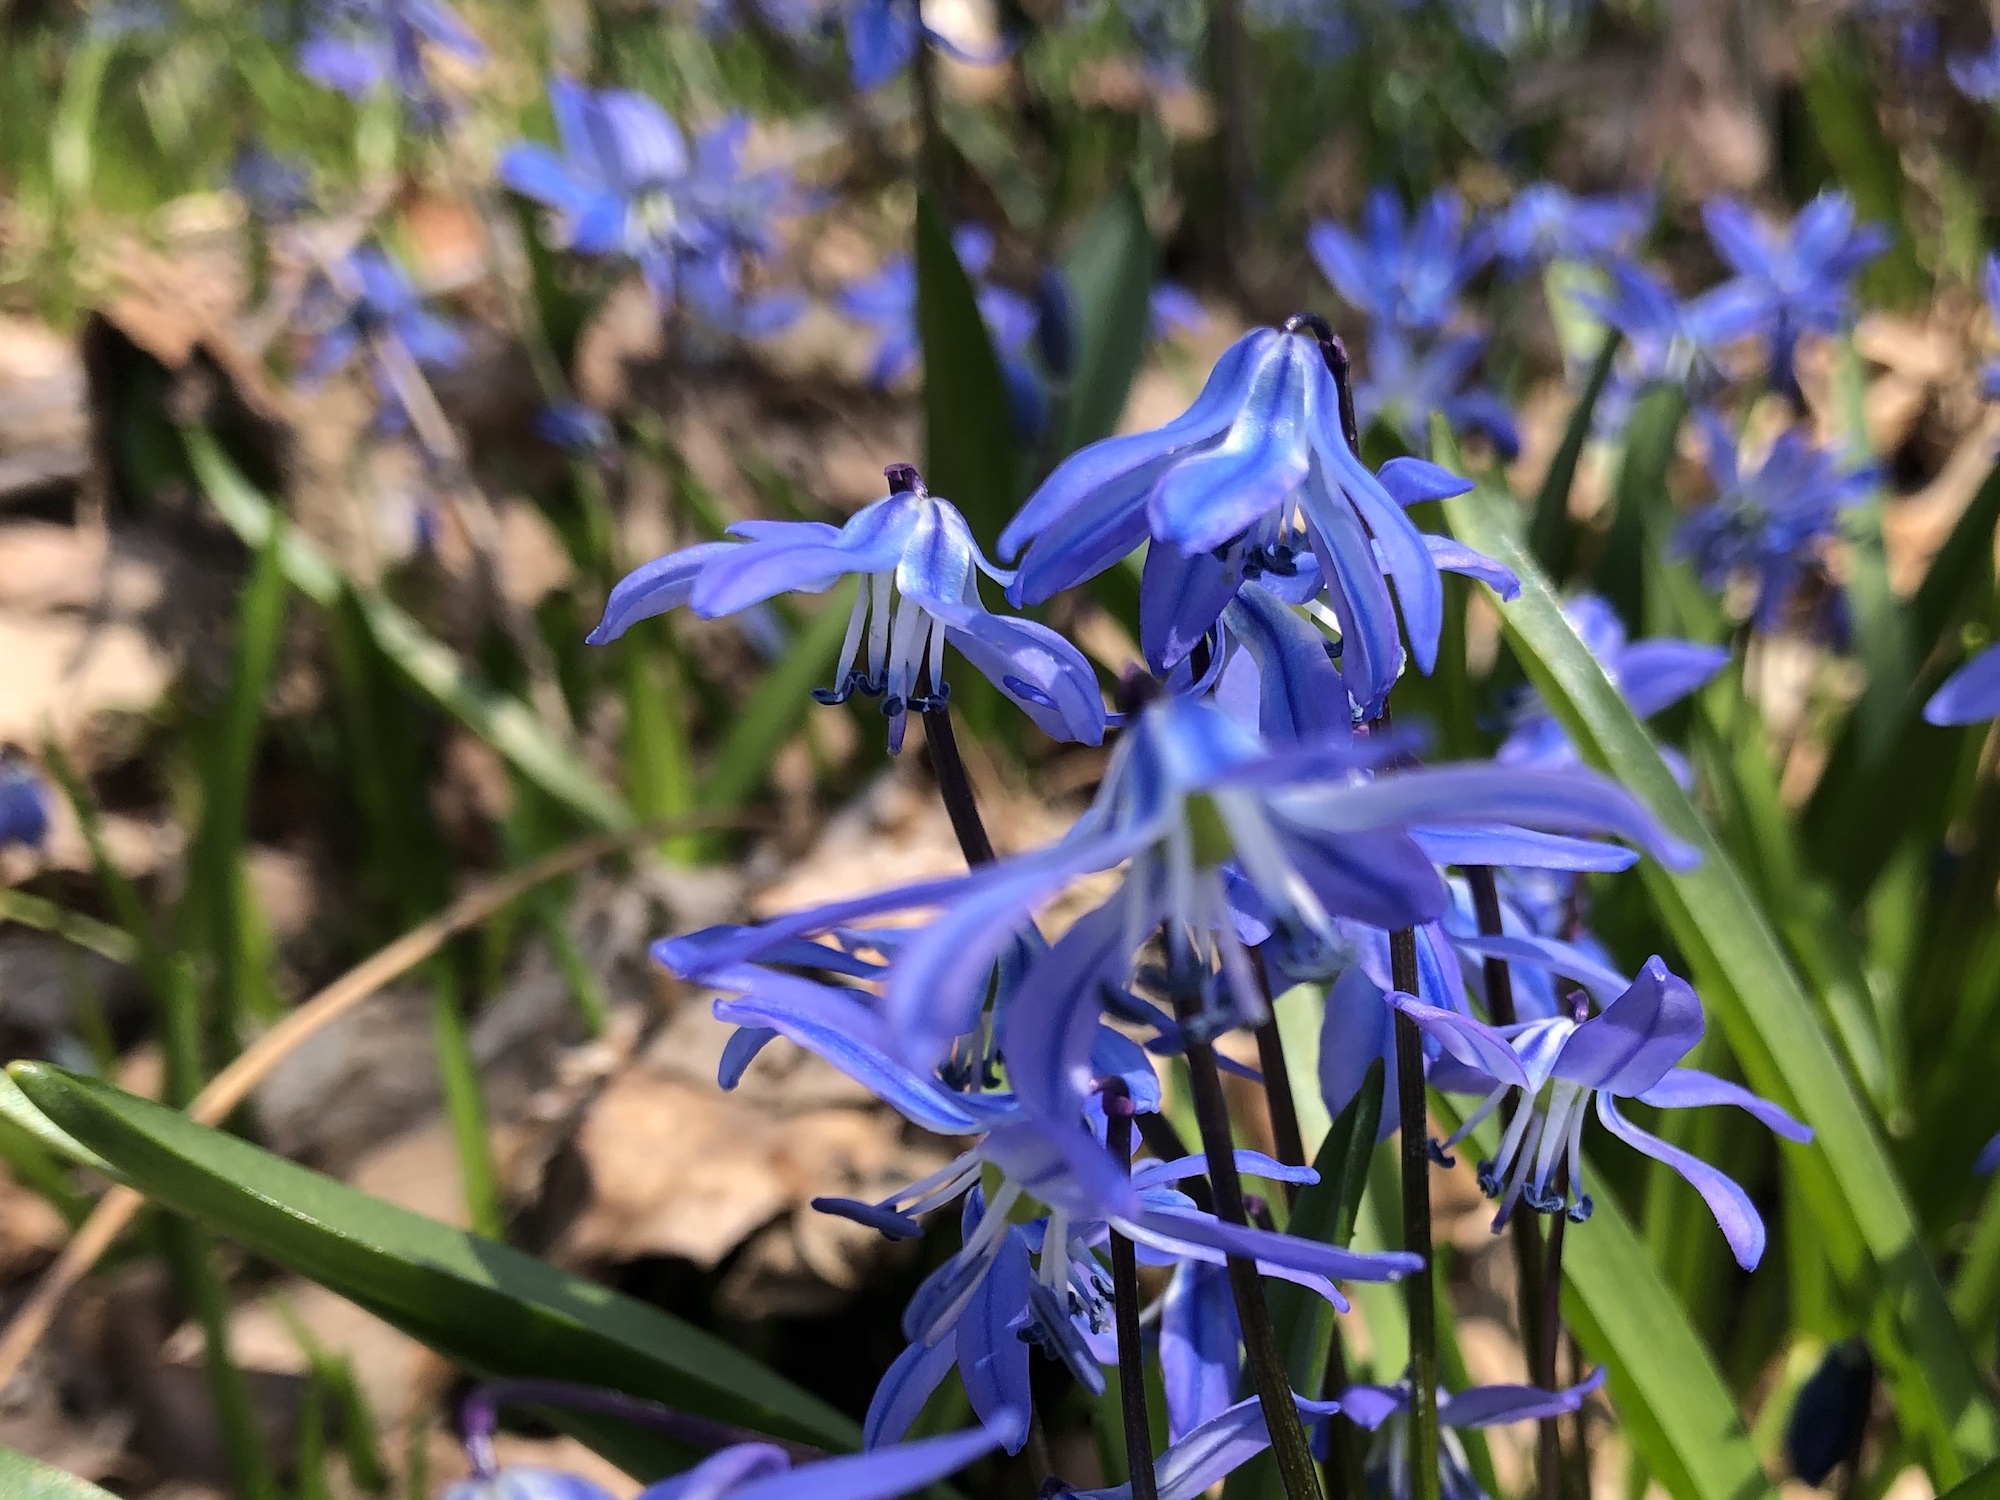 Siberian Squill in woods between Oak Savanna and sycamore tree on April 7, 2020.